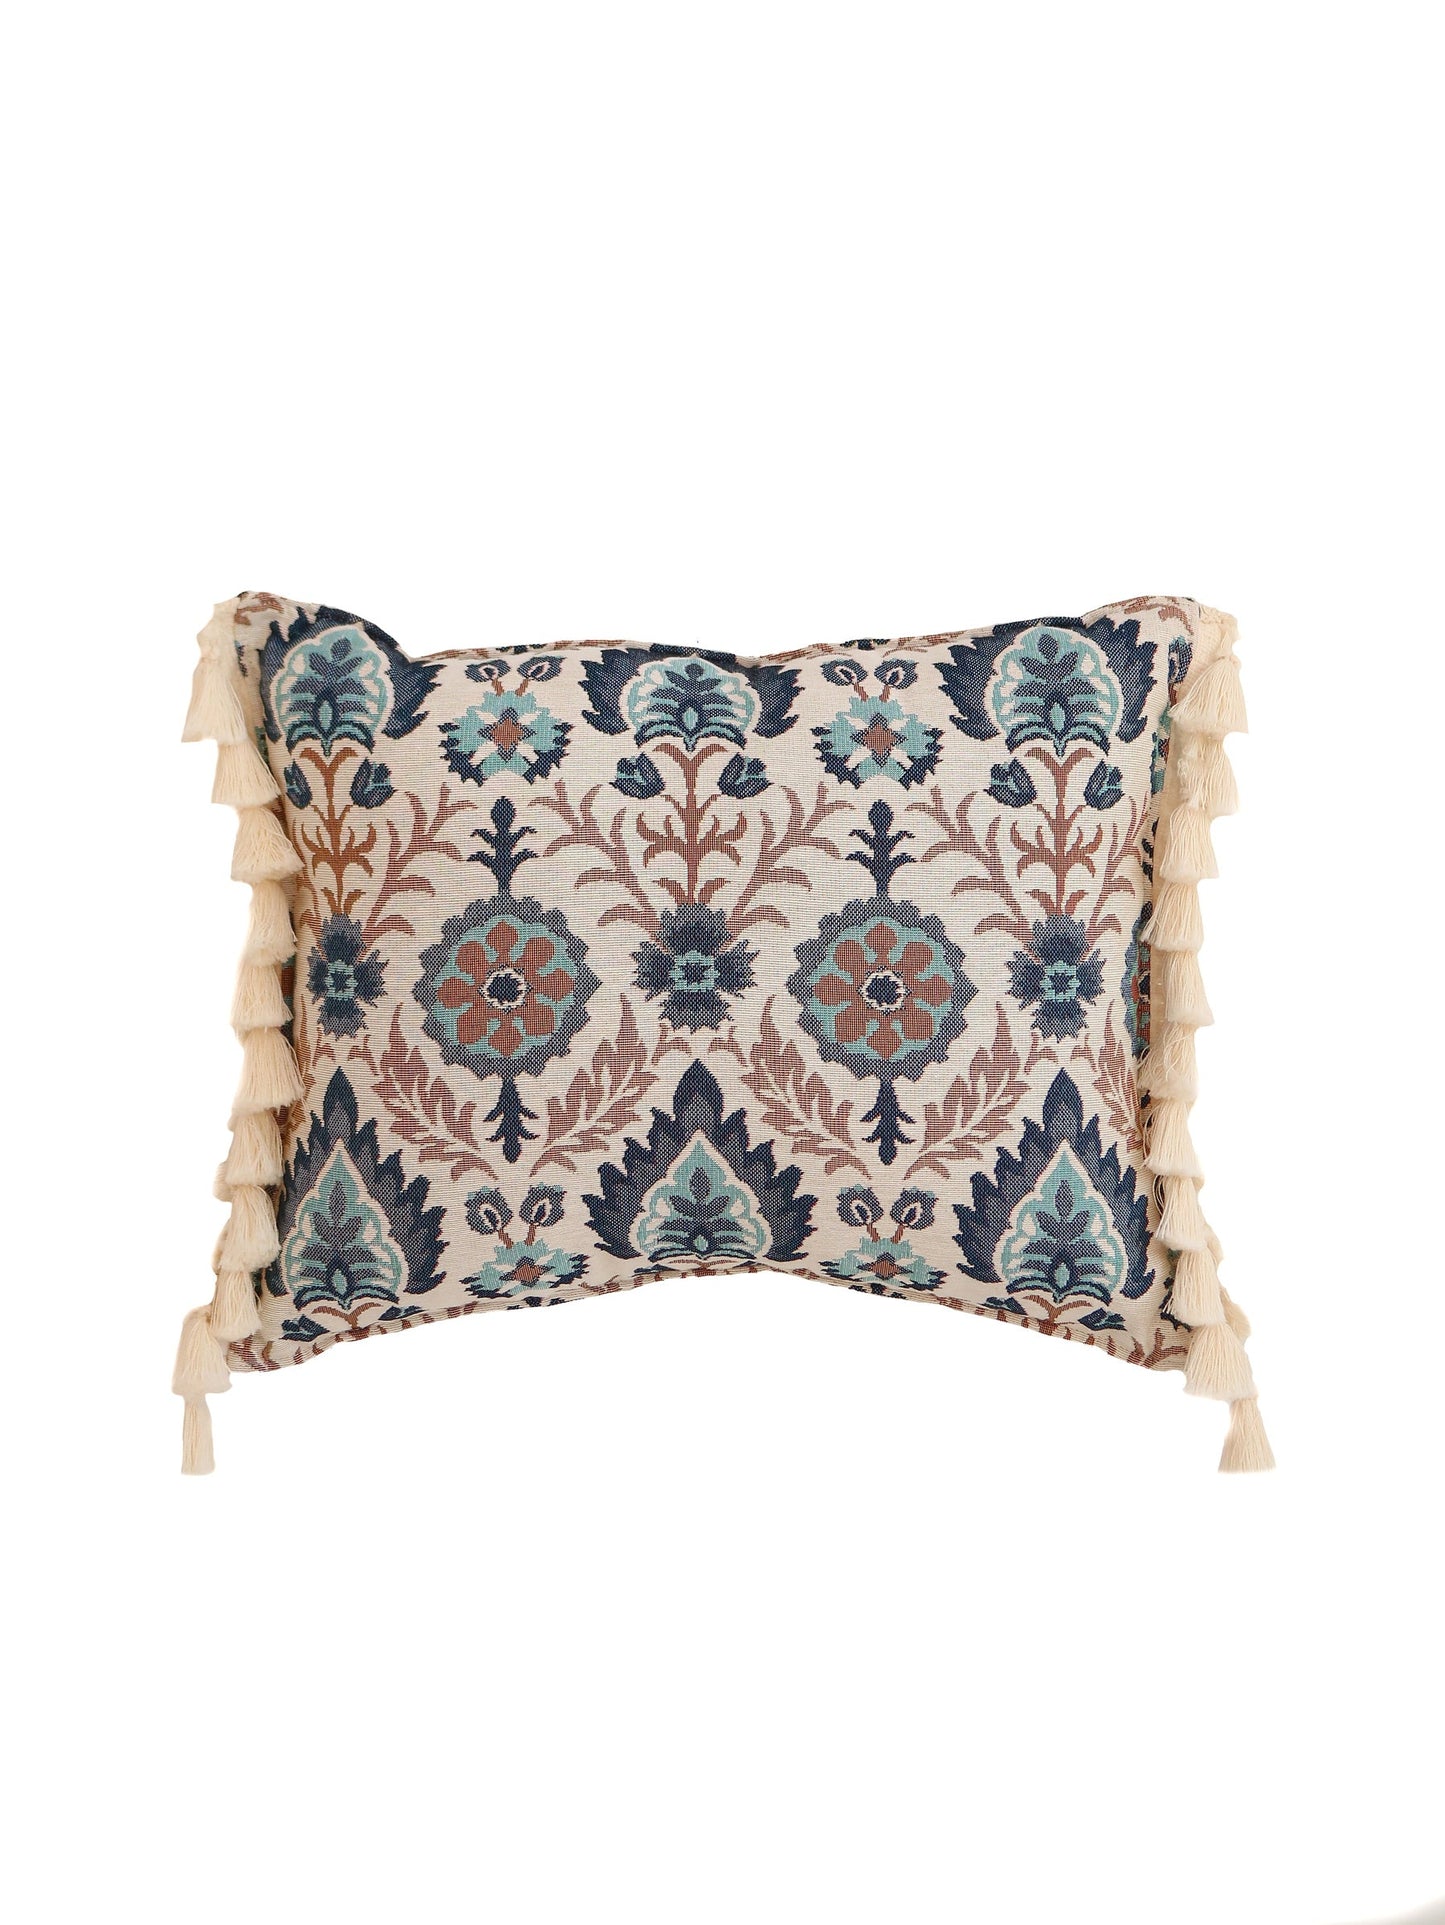 "Blue Iris in Istanbul" Pillow with Fringe